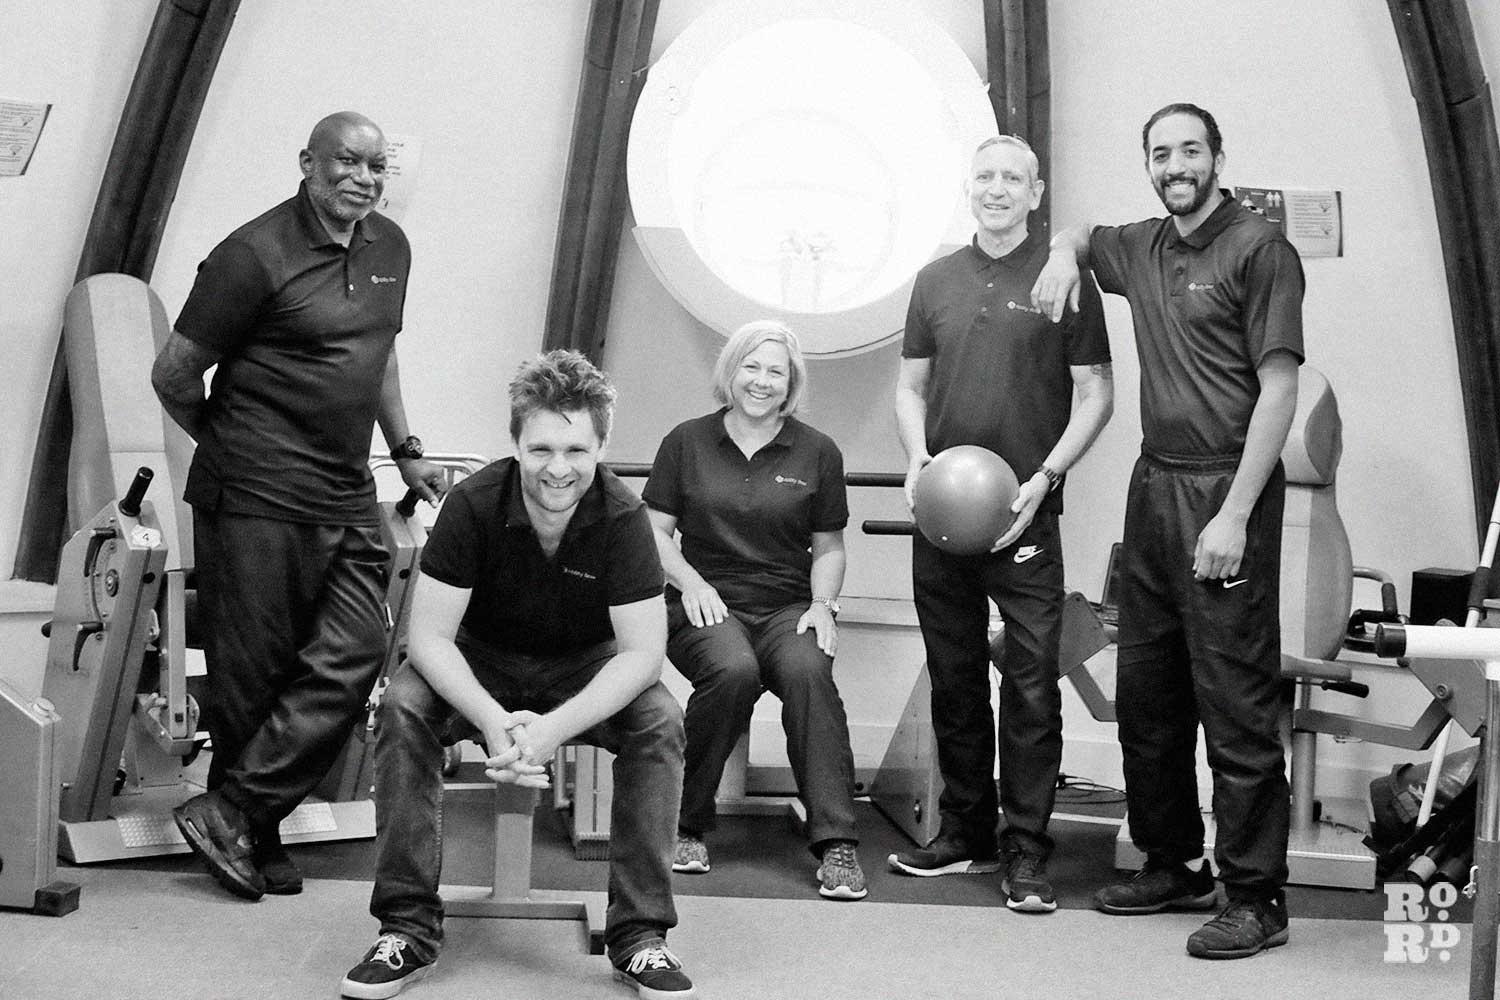 The team at Ability Bow, Roman Road, accessible gym for people with disabilities